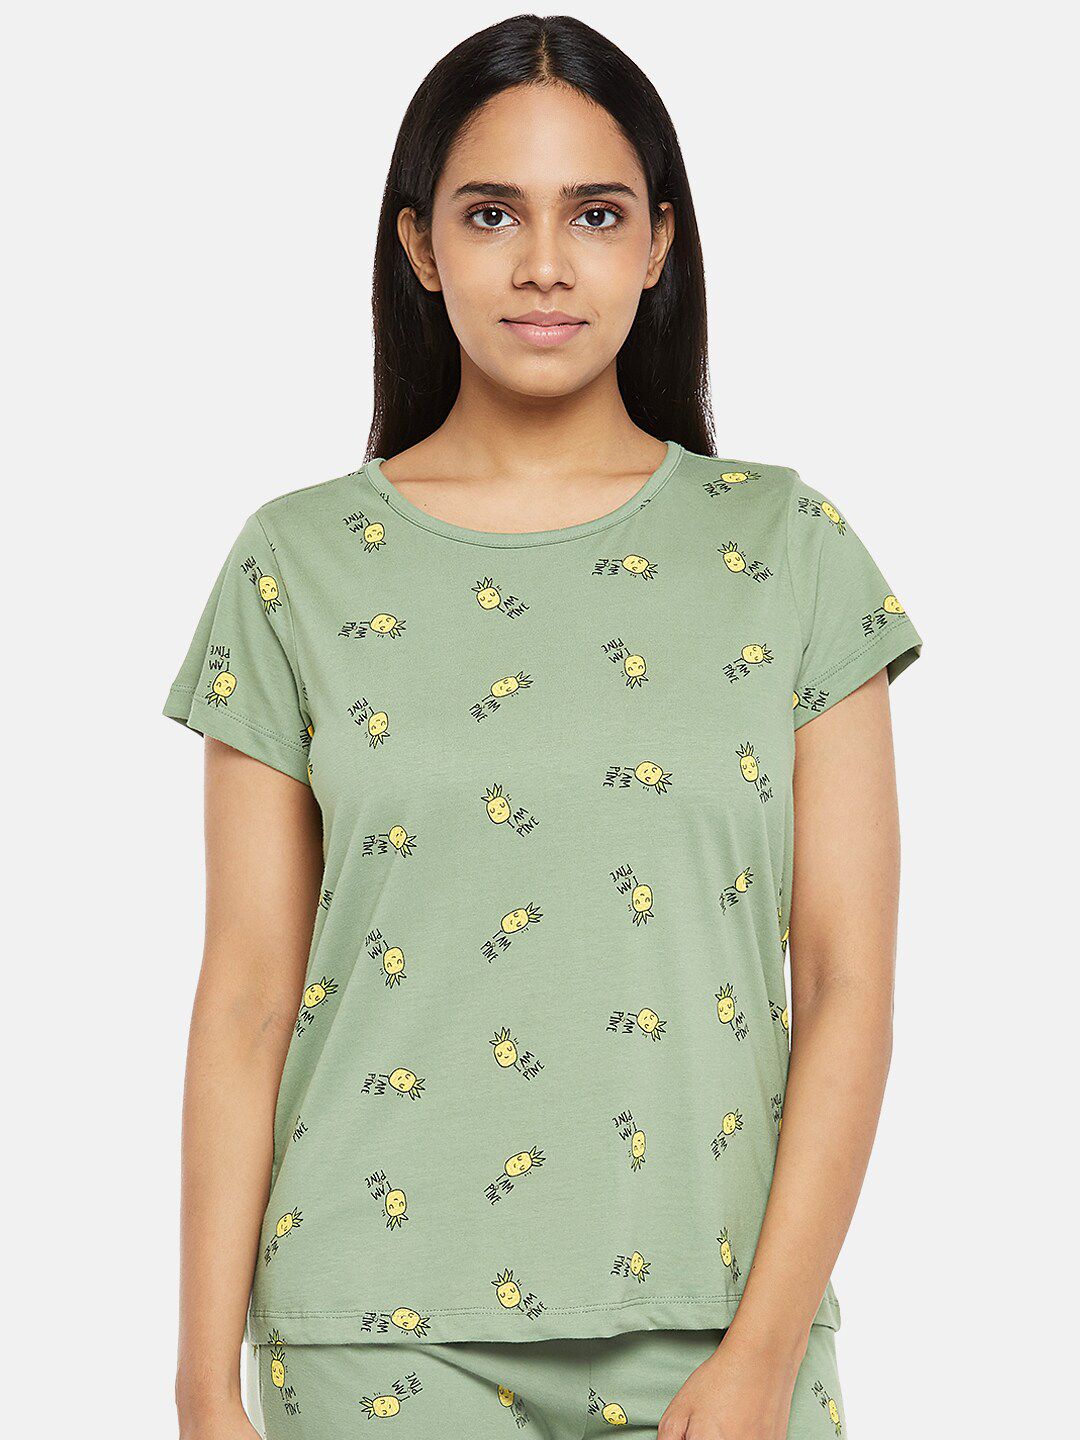 Dreamz by Pantaloons Women Green & Yellow Printed Pure Cotton Lounge T-Shirt Price in India